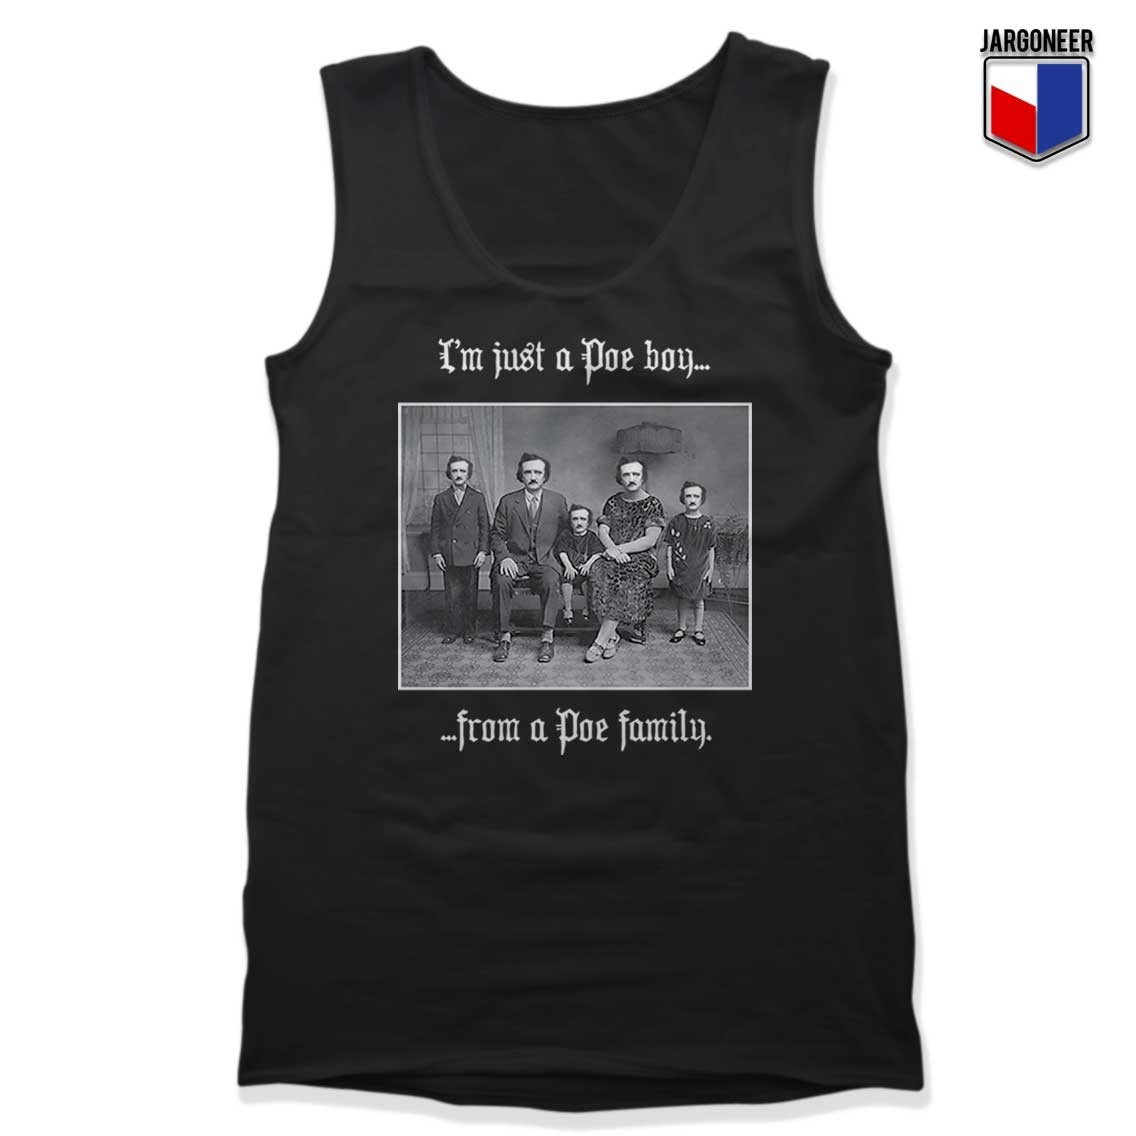 Im Just A Poe Boy From a Poe Family Tank Top - Shop Unique Graphic Cool Shirt Designs